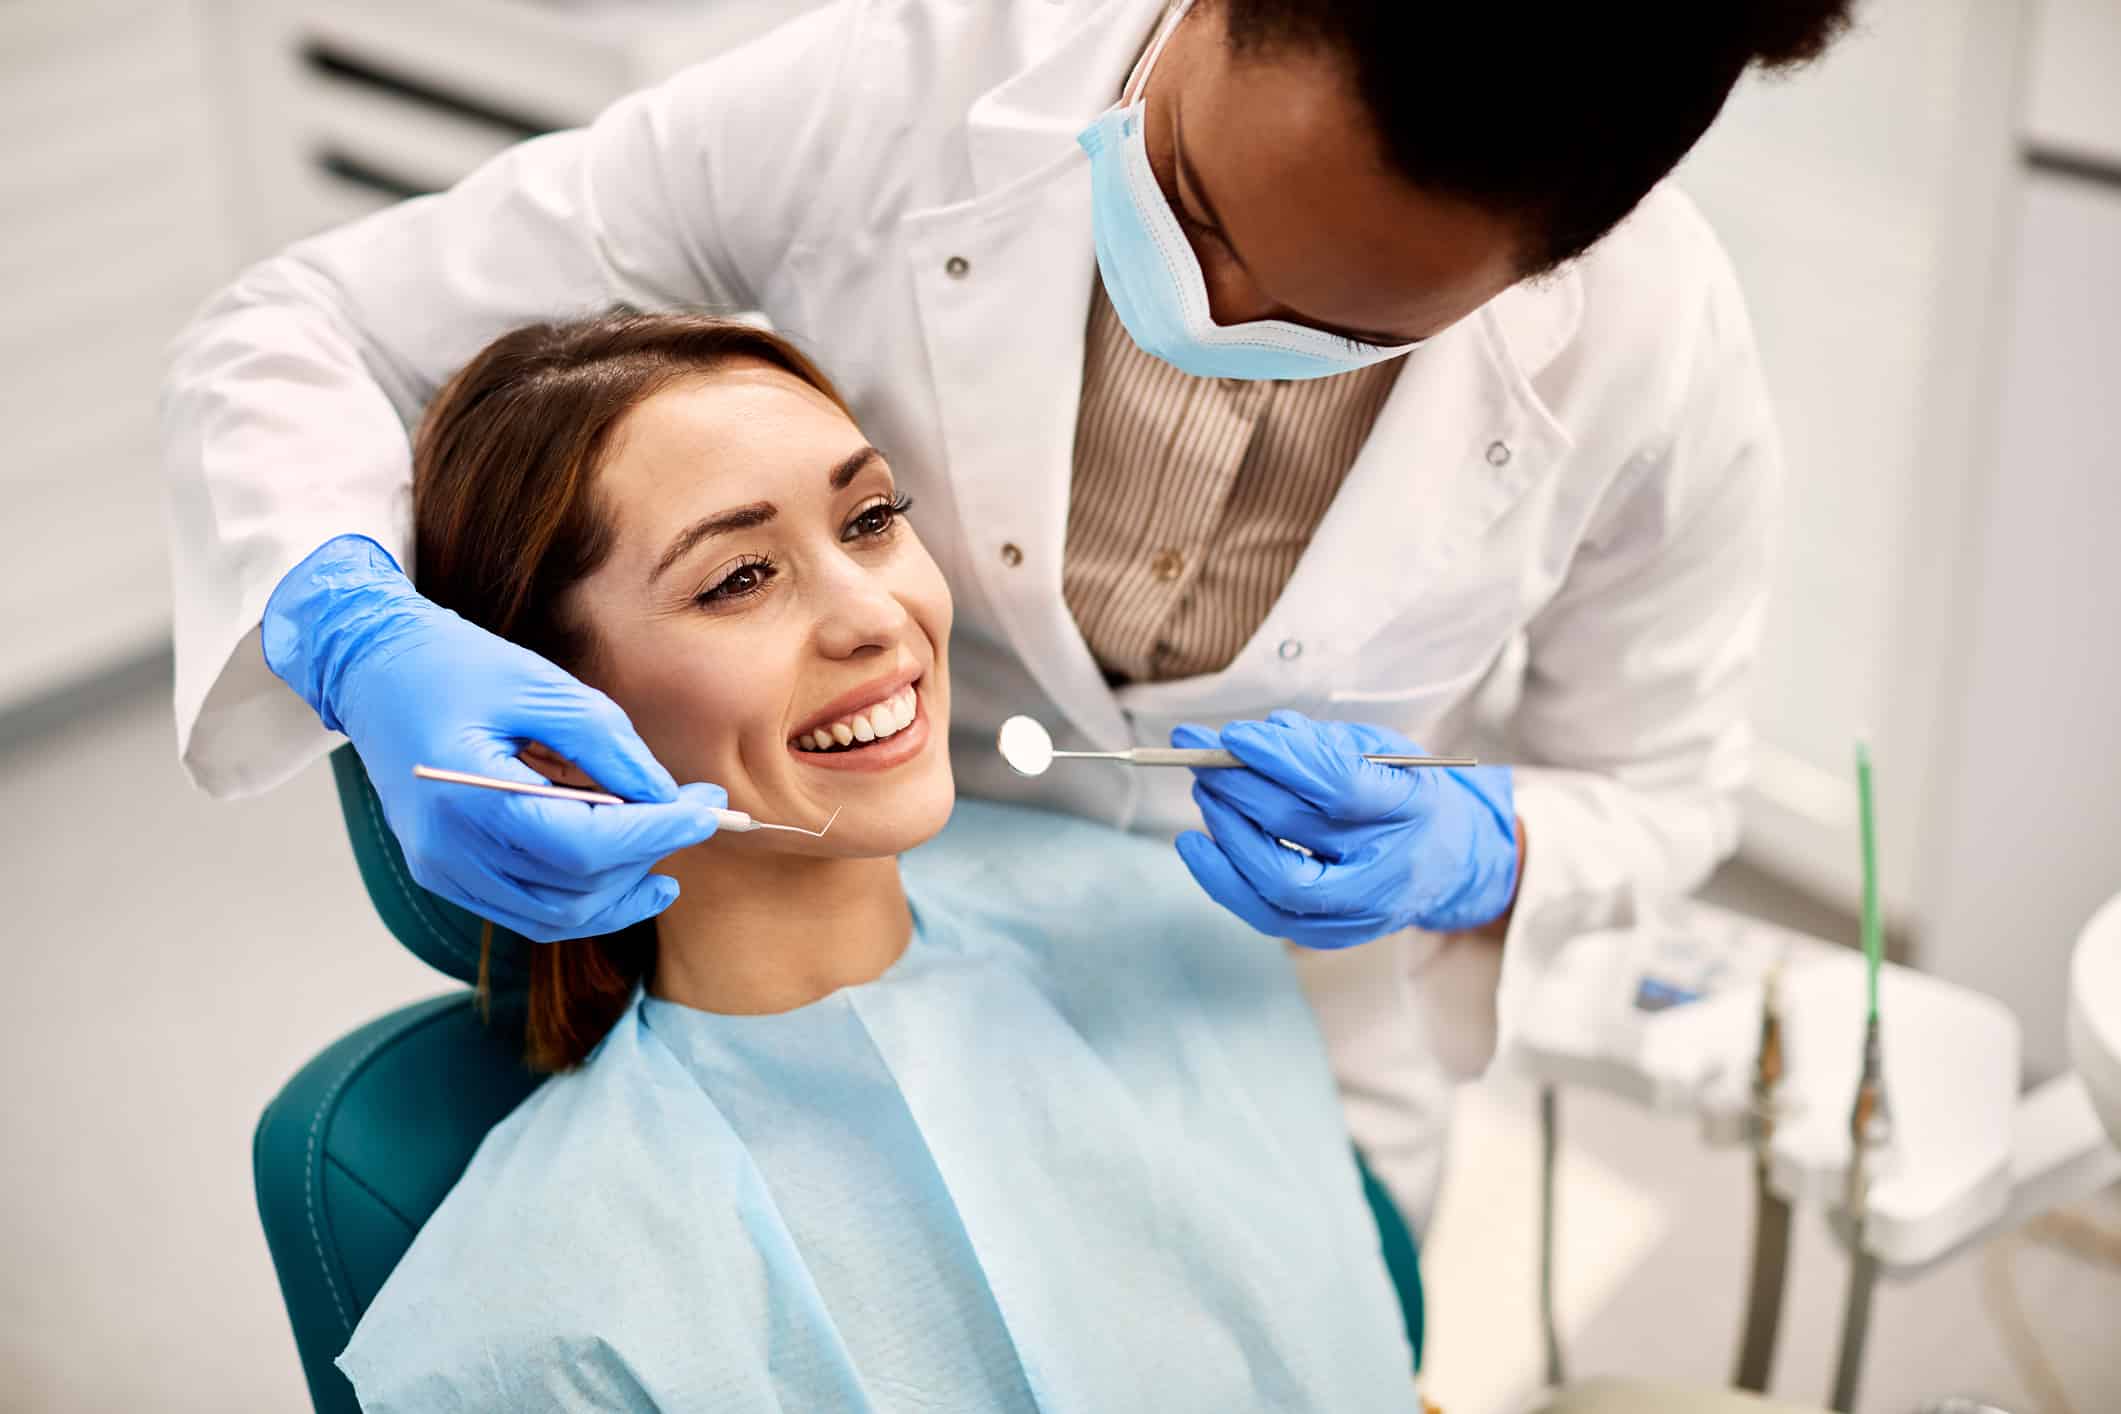 Young happy woman during dental procedure at a dentist's checkup.